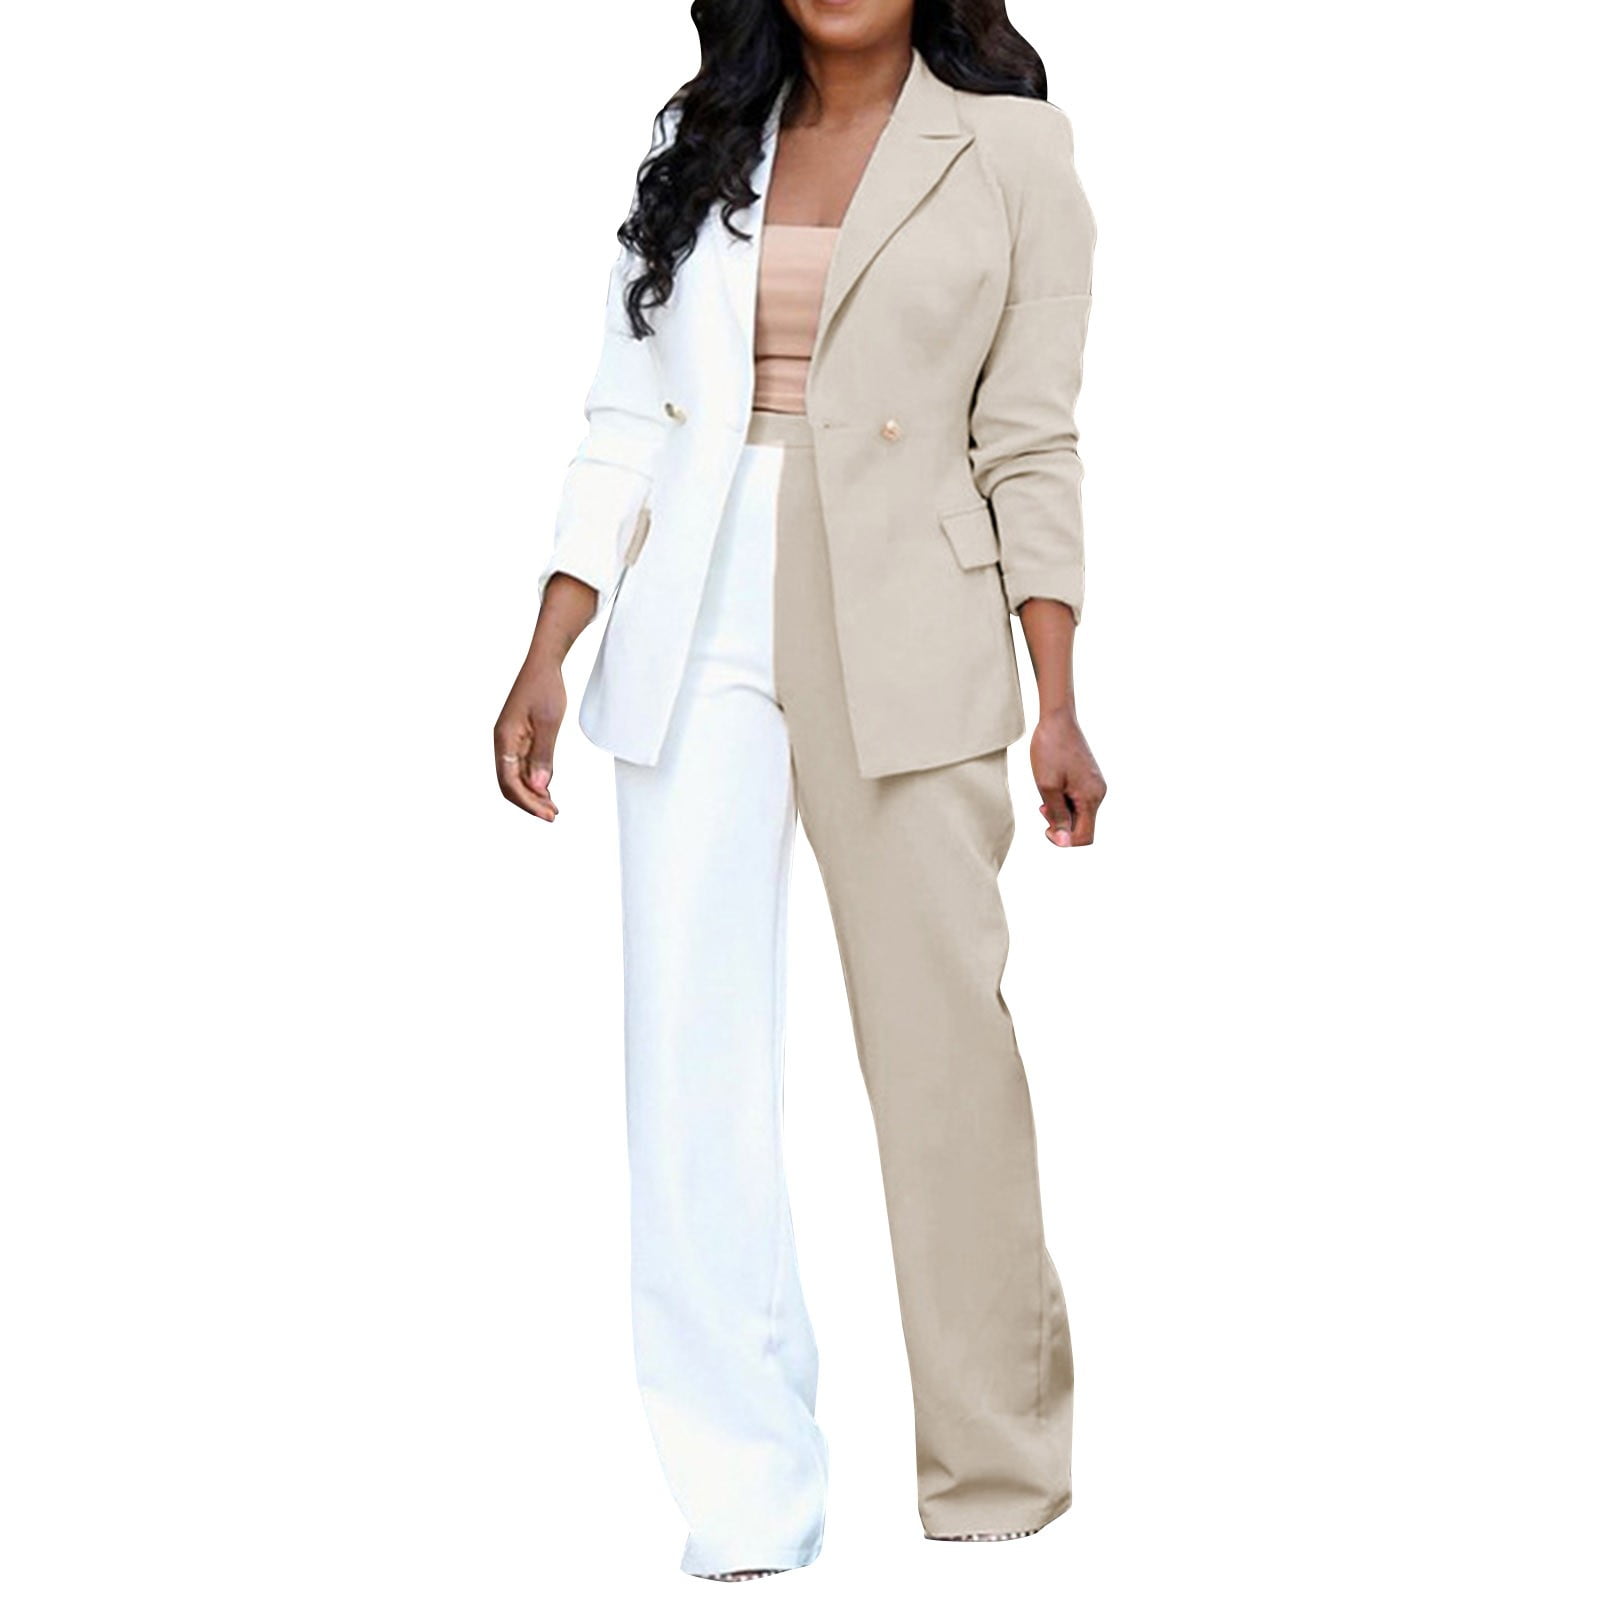 NKOOGH Wedding Pant Suits for Bride Two Piece for Women Pants Suit